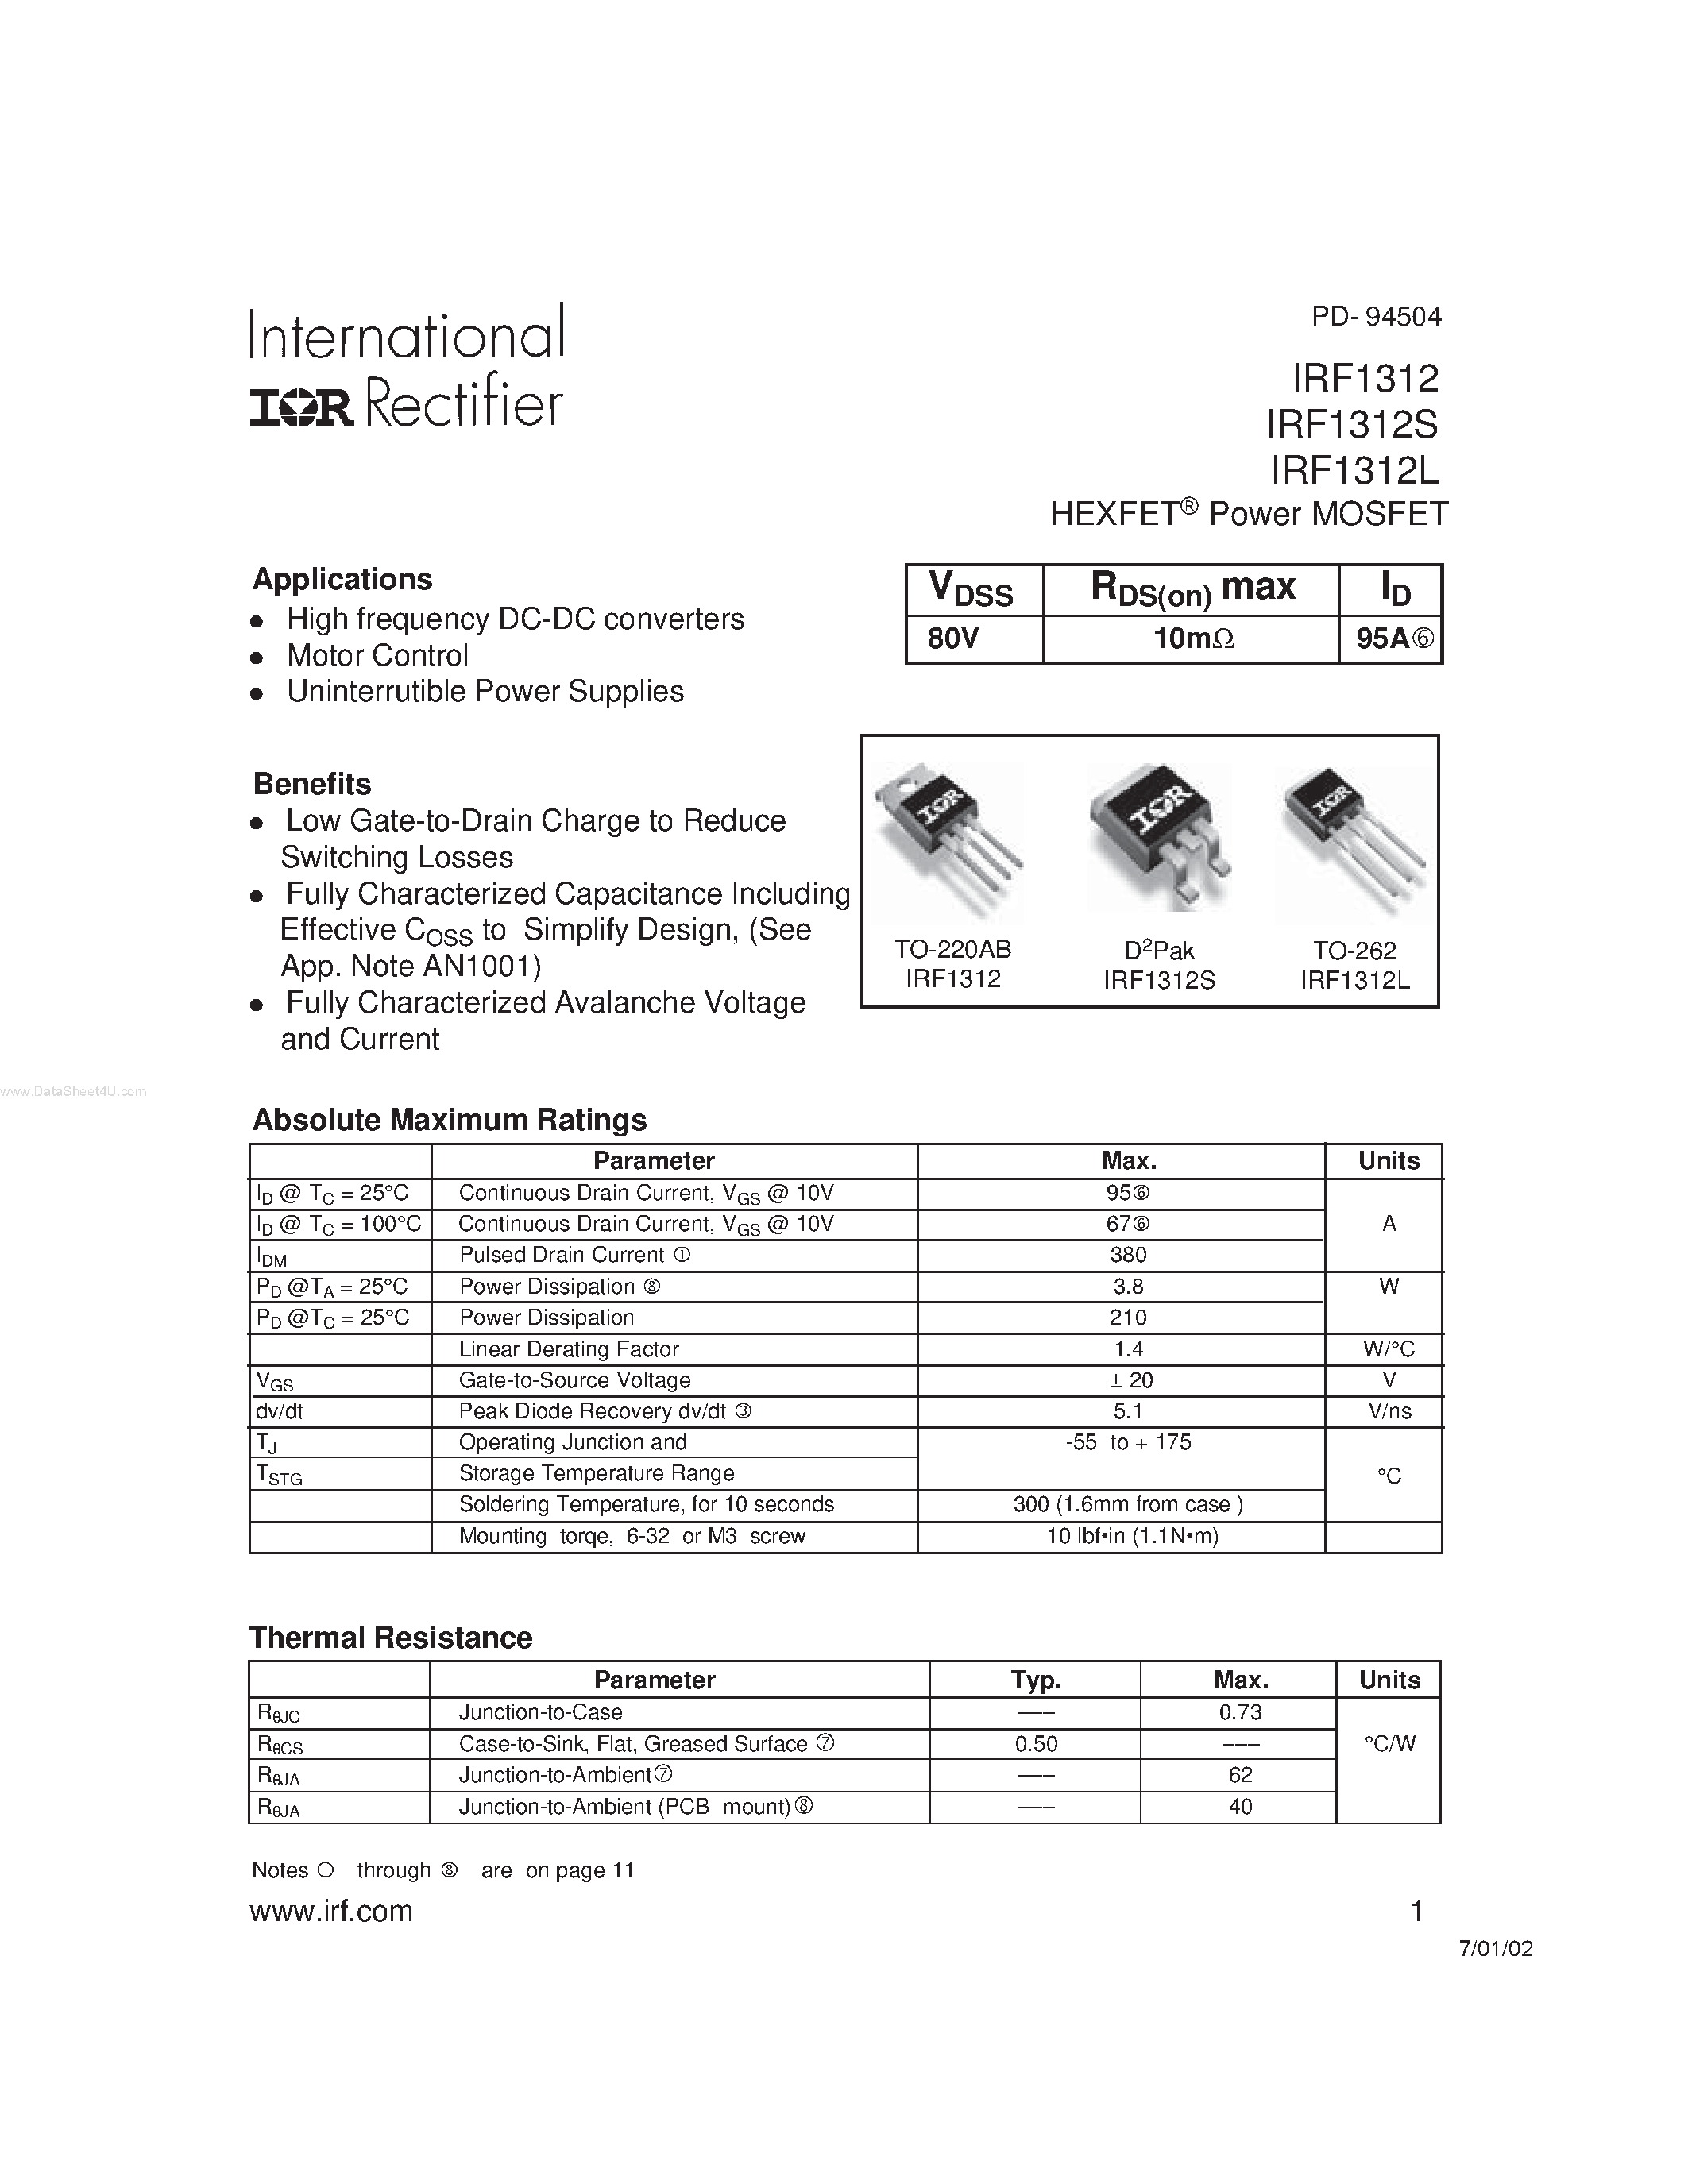 Datasheet IRF1312 - (IRF1312x) HEXFET Power MOSFET page 1